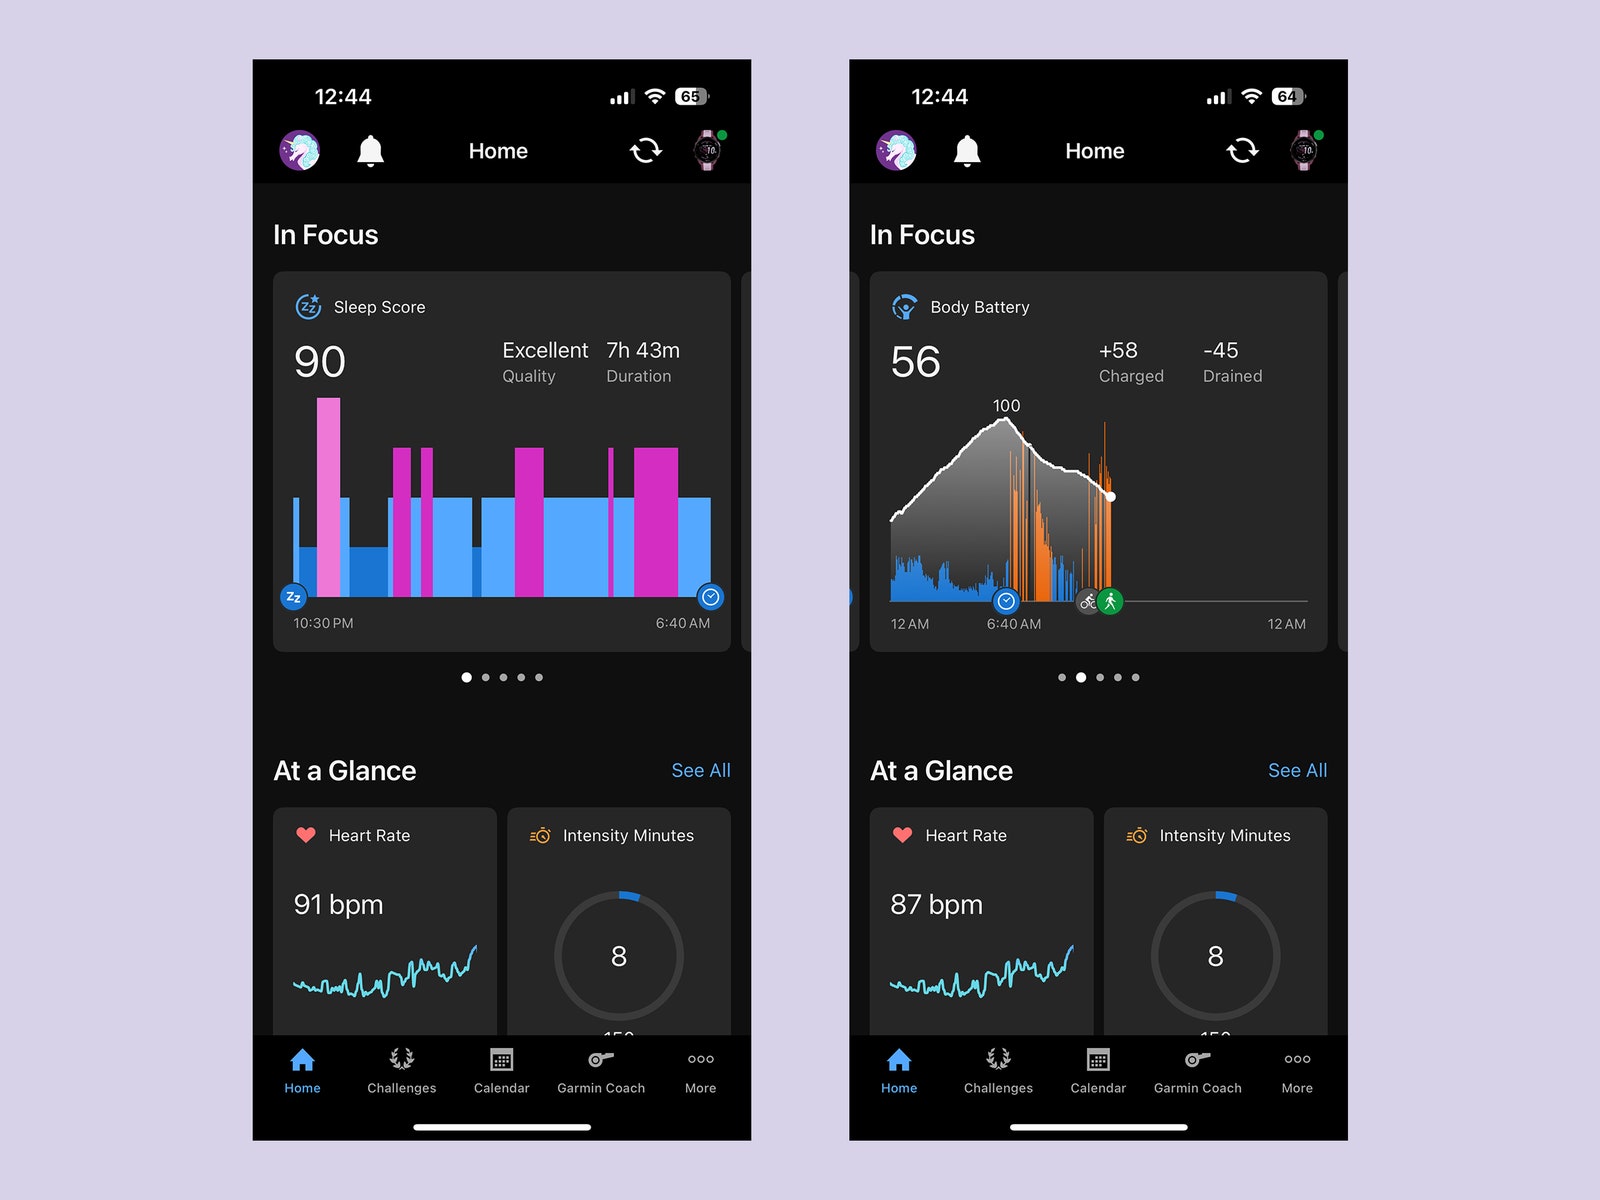 App screenshots showing sleep score heart rate and other health stats